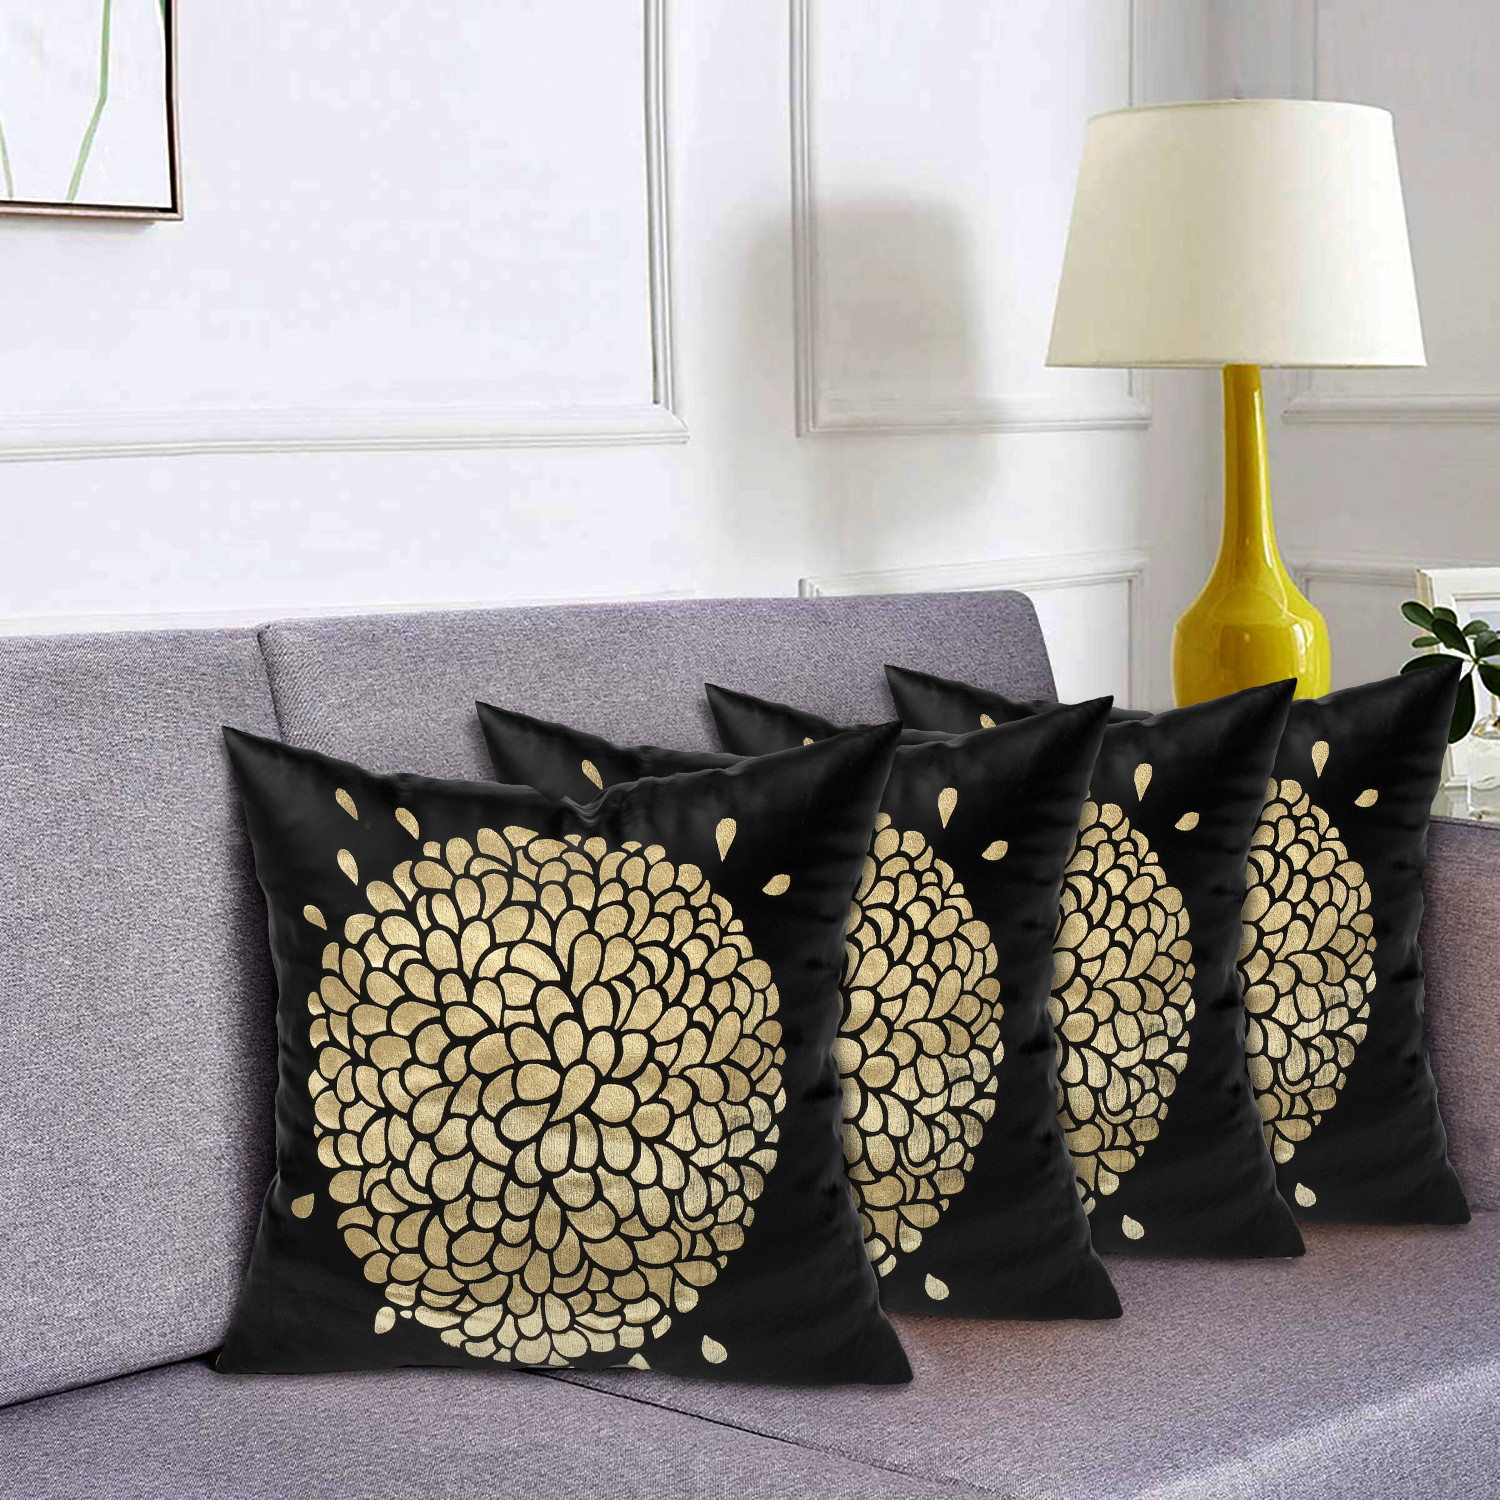 Kuber Industries Rangoli Print Soft Decorative Square Cushion Cover, Cushion Case For Sofa Couch Bed 16x16 Inch-(Black)